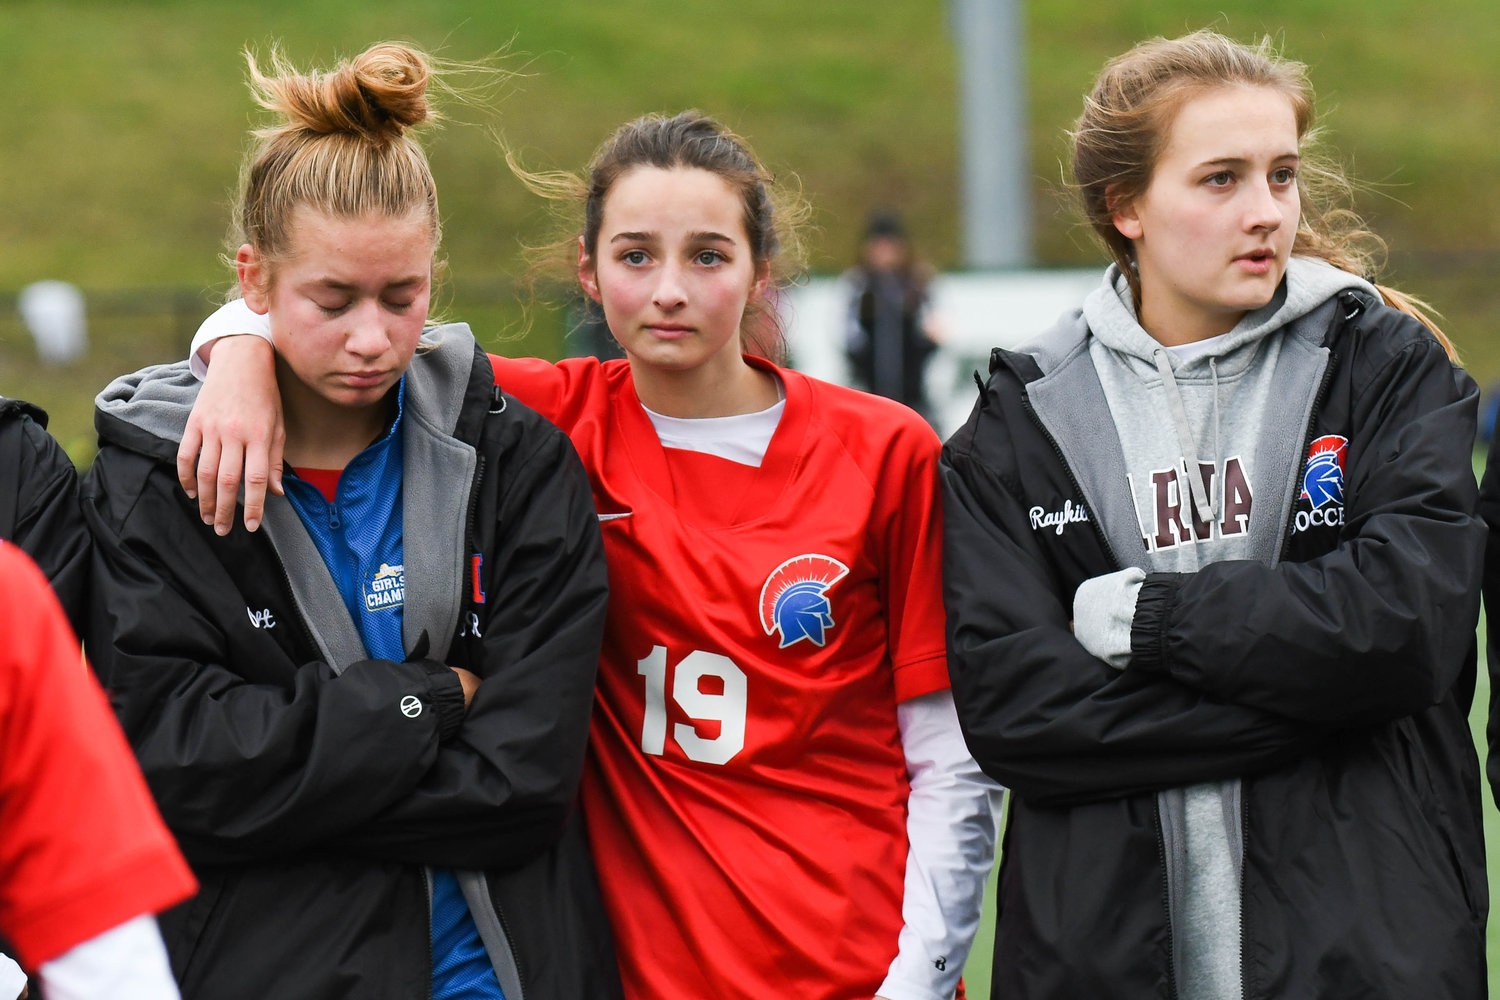 New Hartford soccer players react after losing to Albertus Magnus 3-1 in the Class A state final on Sunday at Tompkins-Cortland Community College. The loss ended the program's 59-game unbeaten streak.